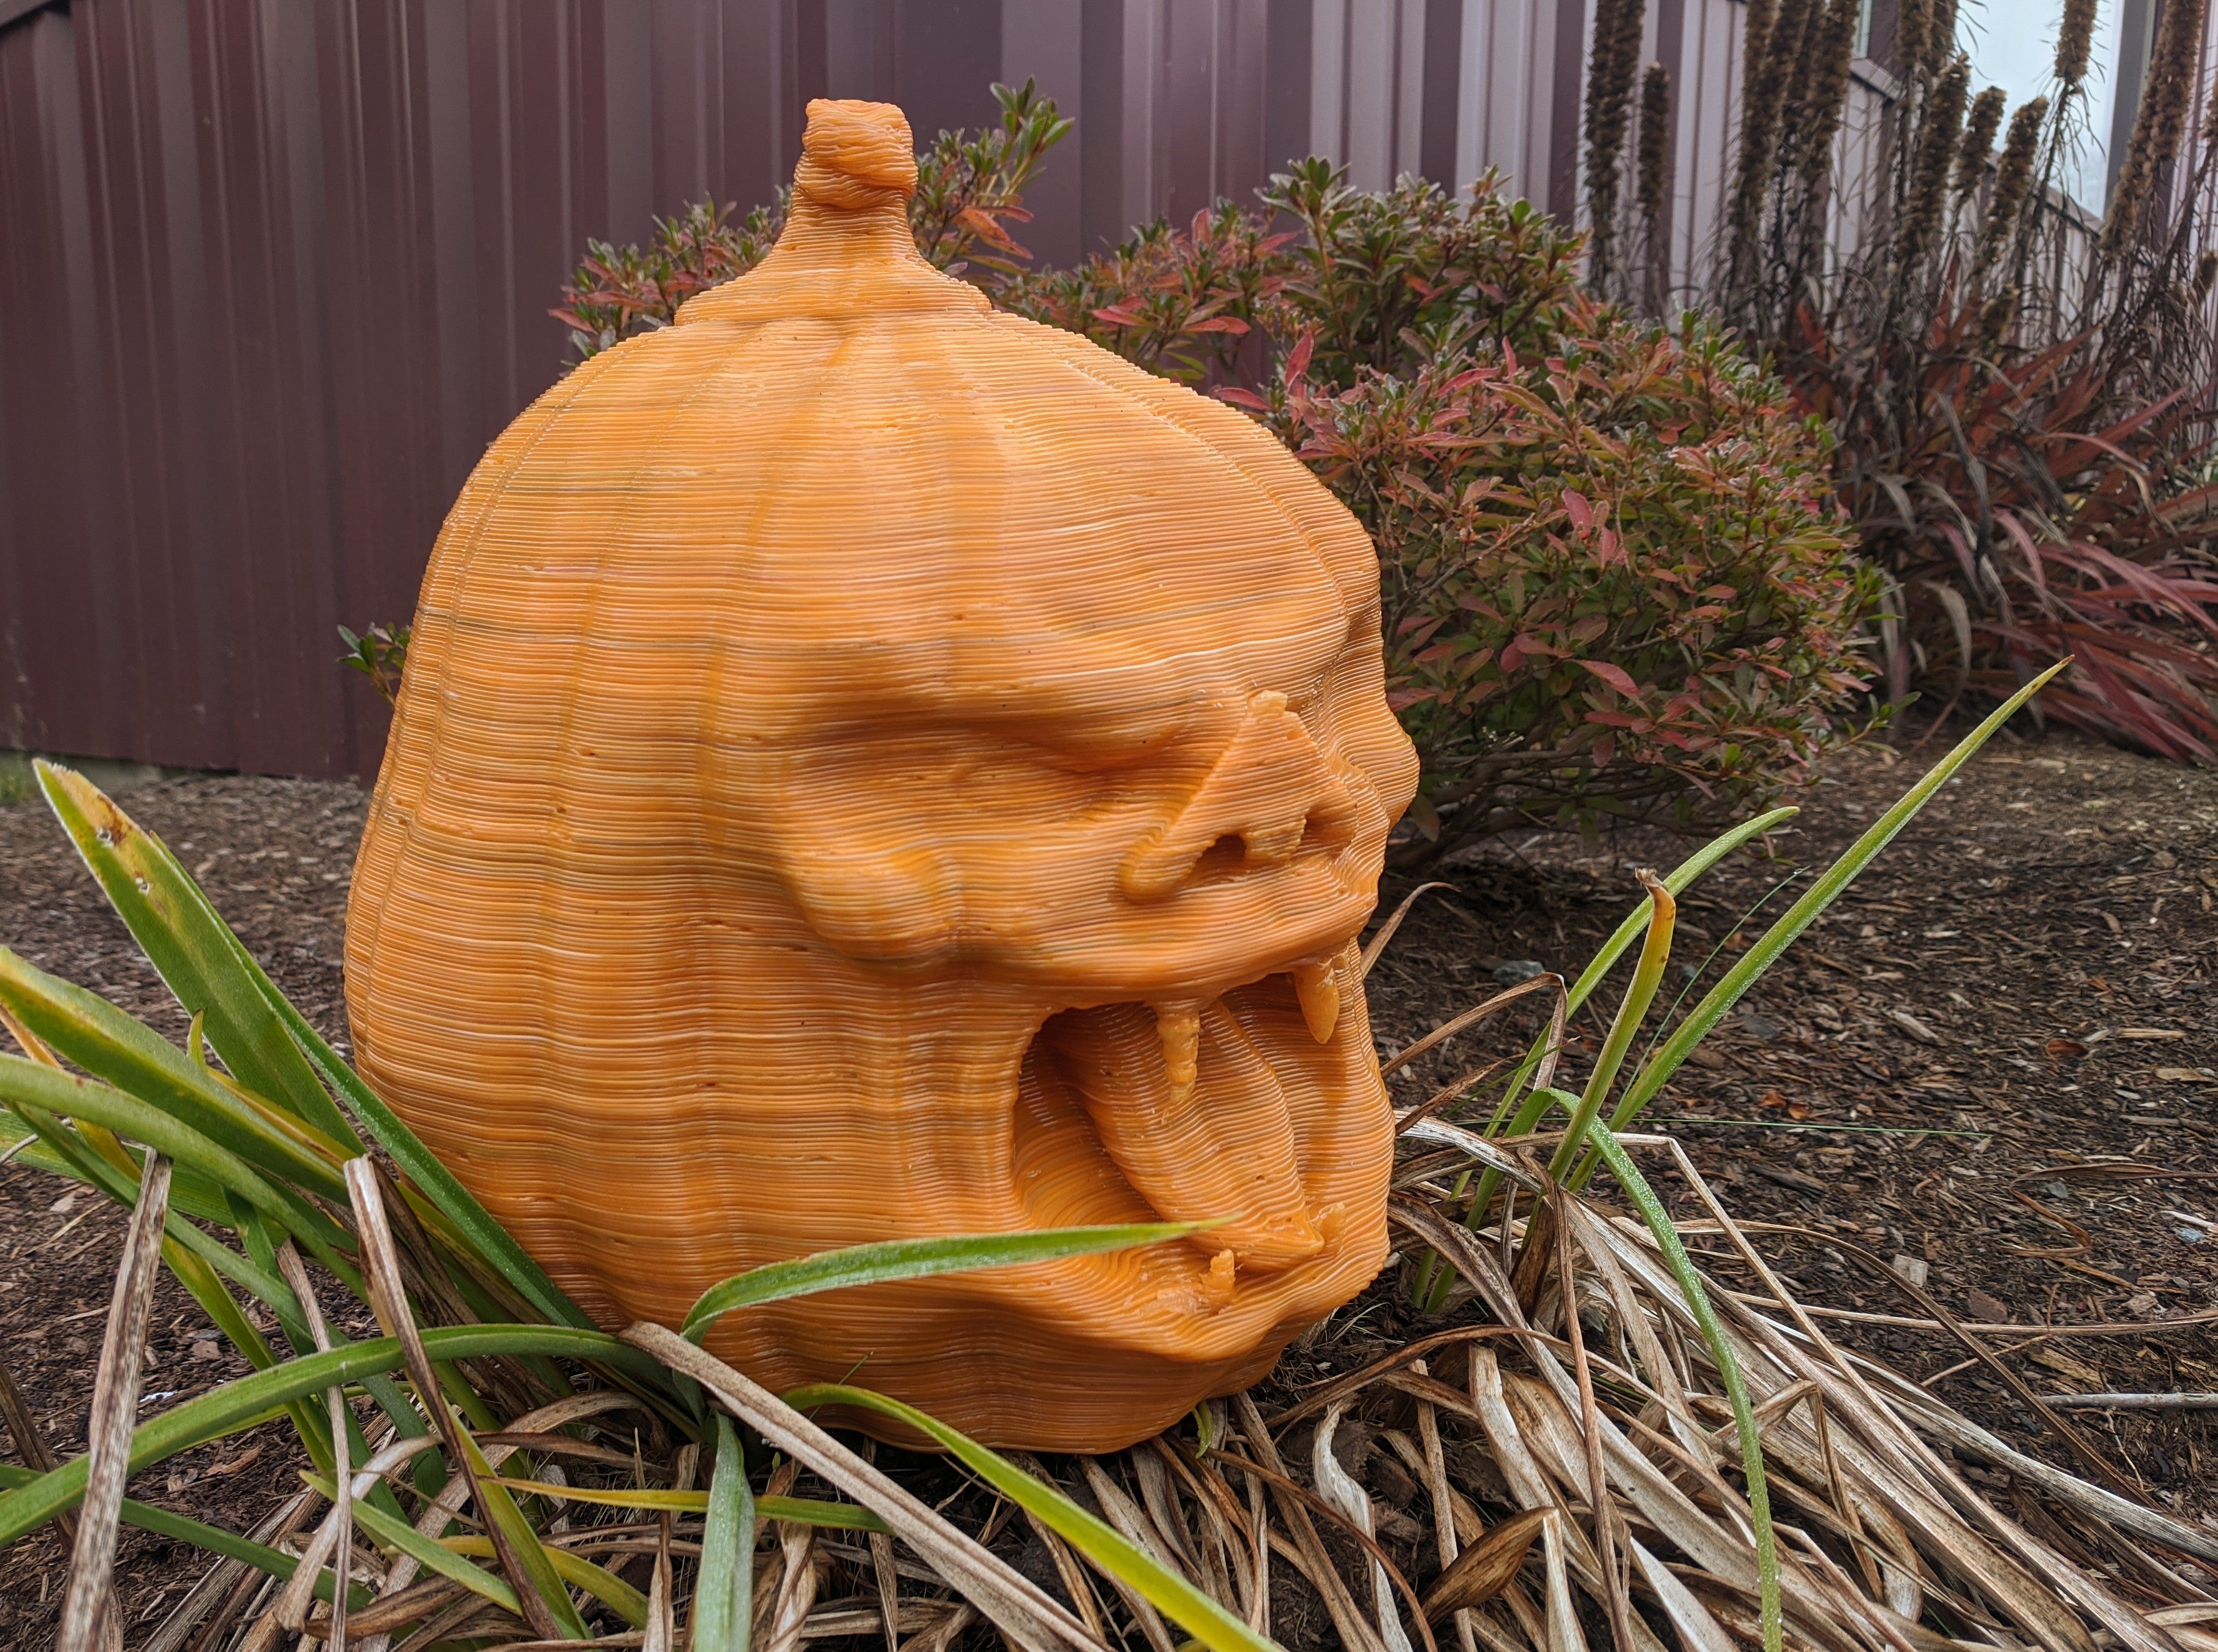 Spooky 3D Printed Pumpkin - Happy Halloween from the team at Massive Dimension!